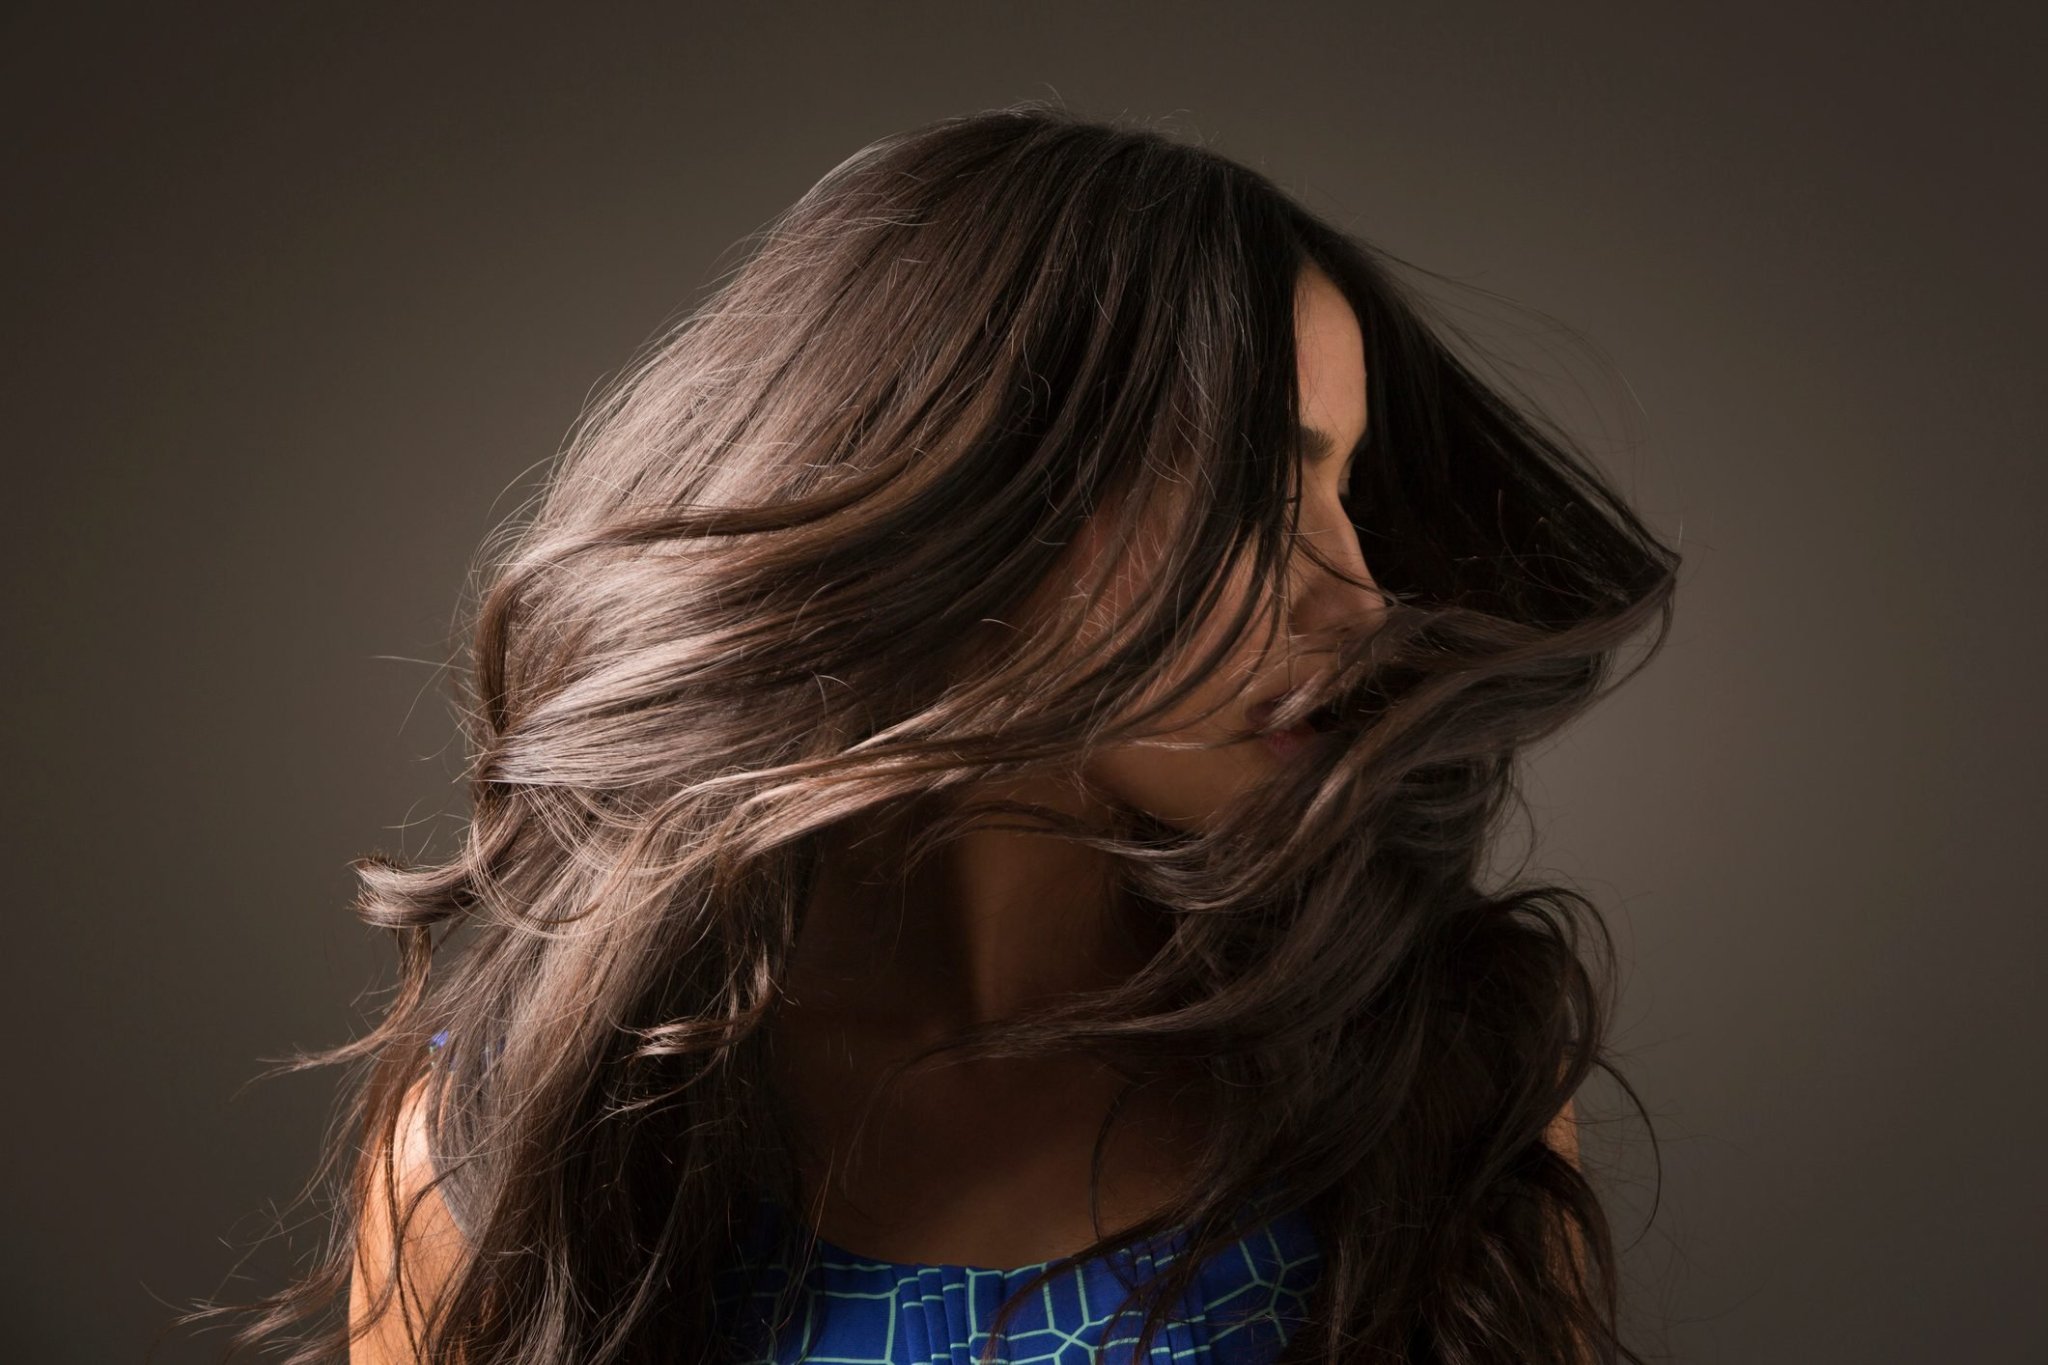 7 Silent Signs Your Hair Is Desperate for Certain Nutrients